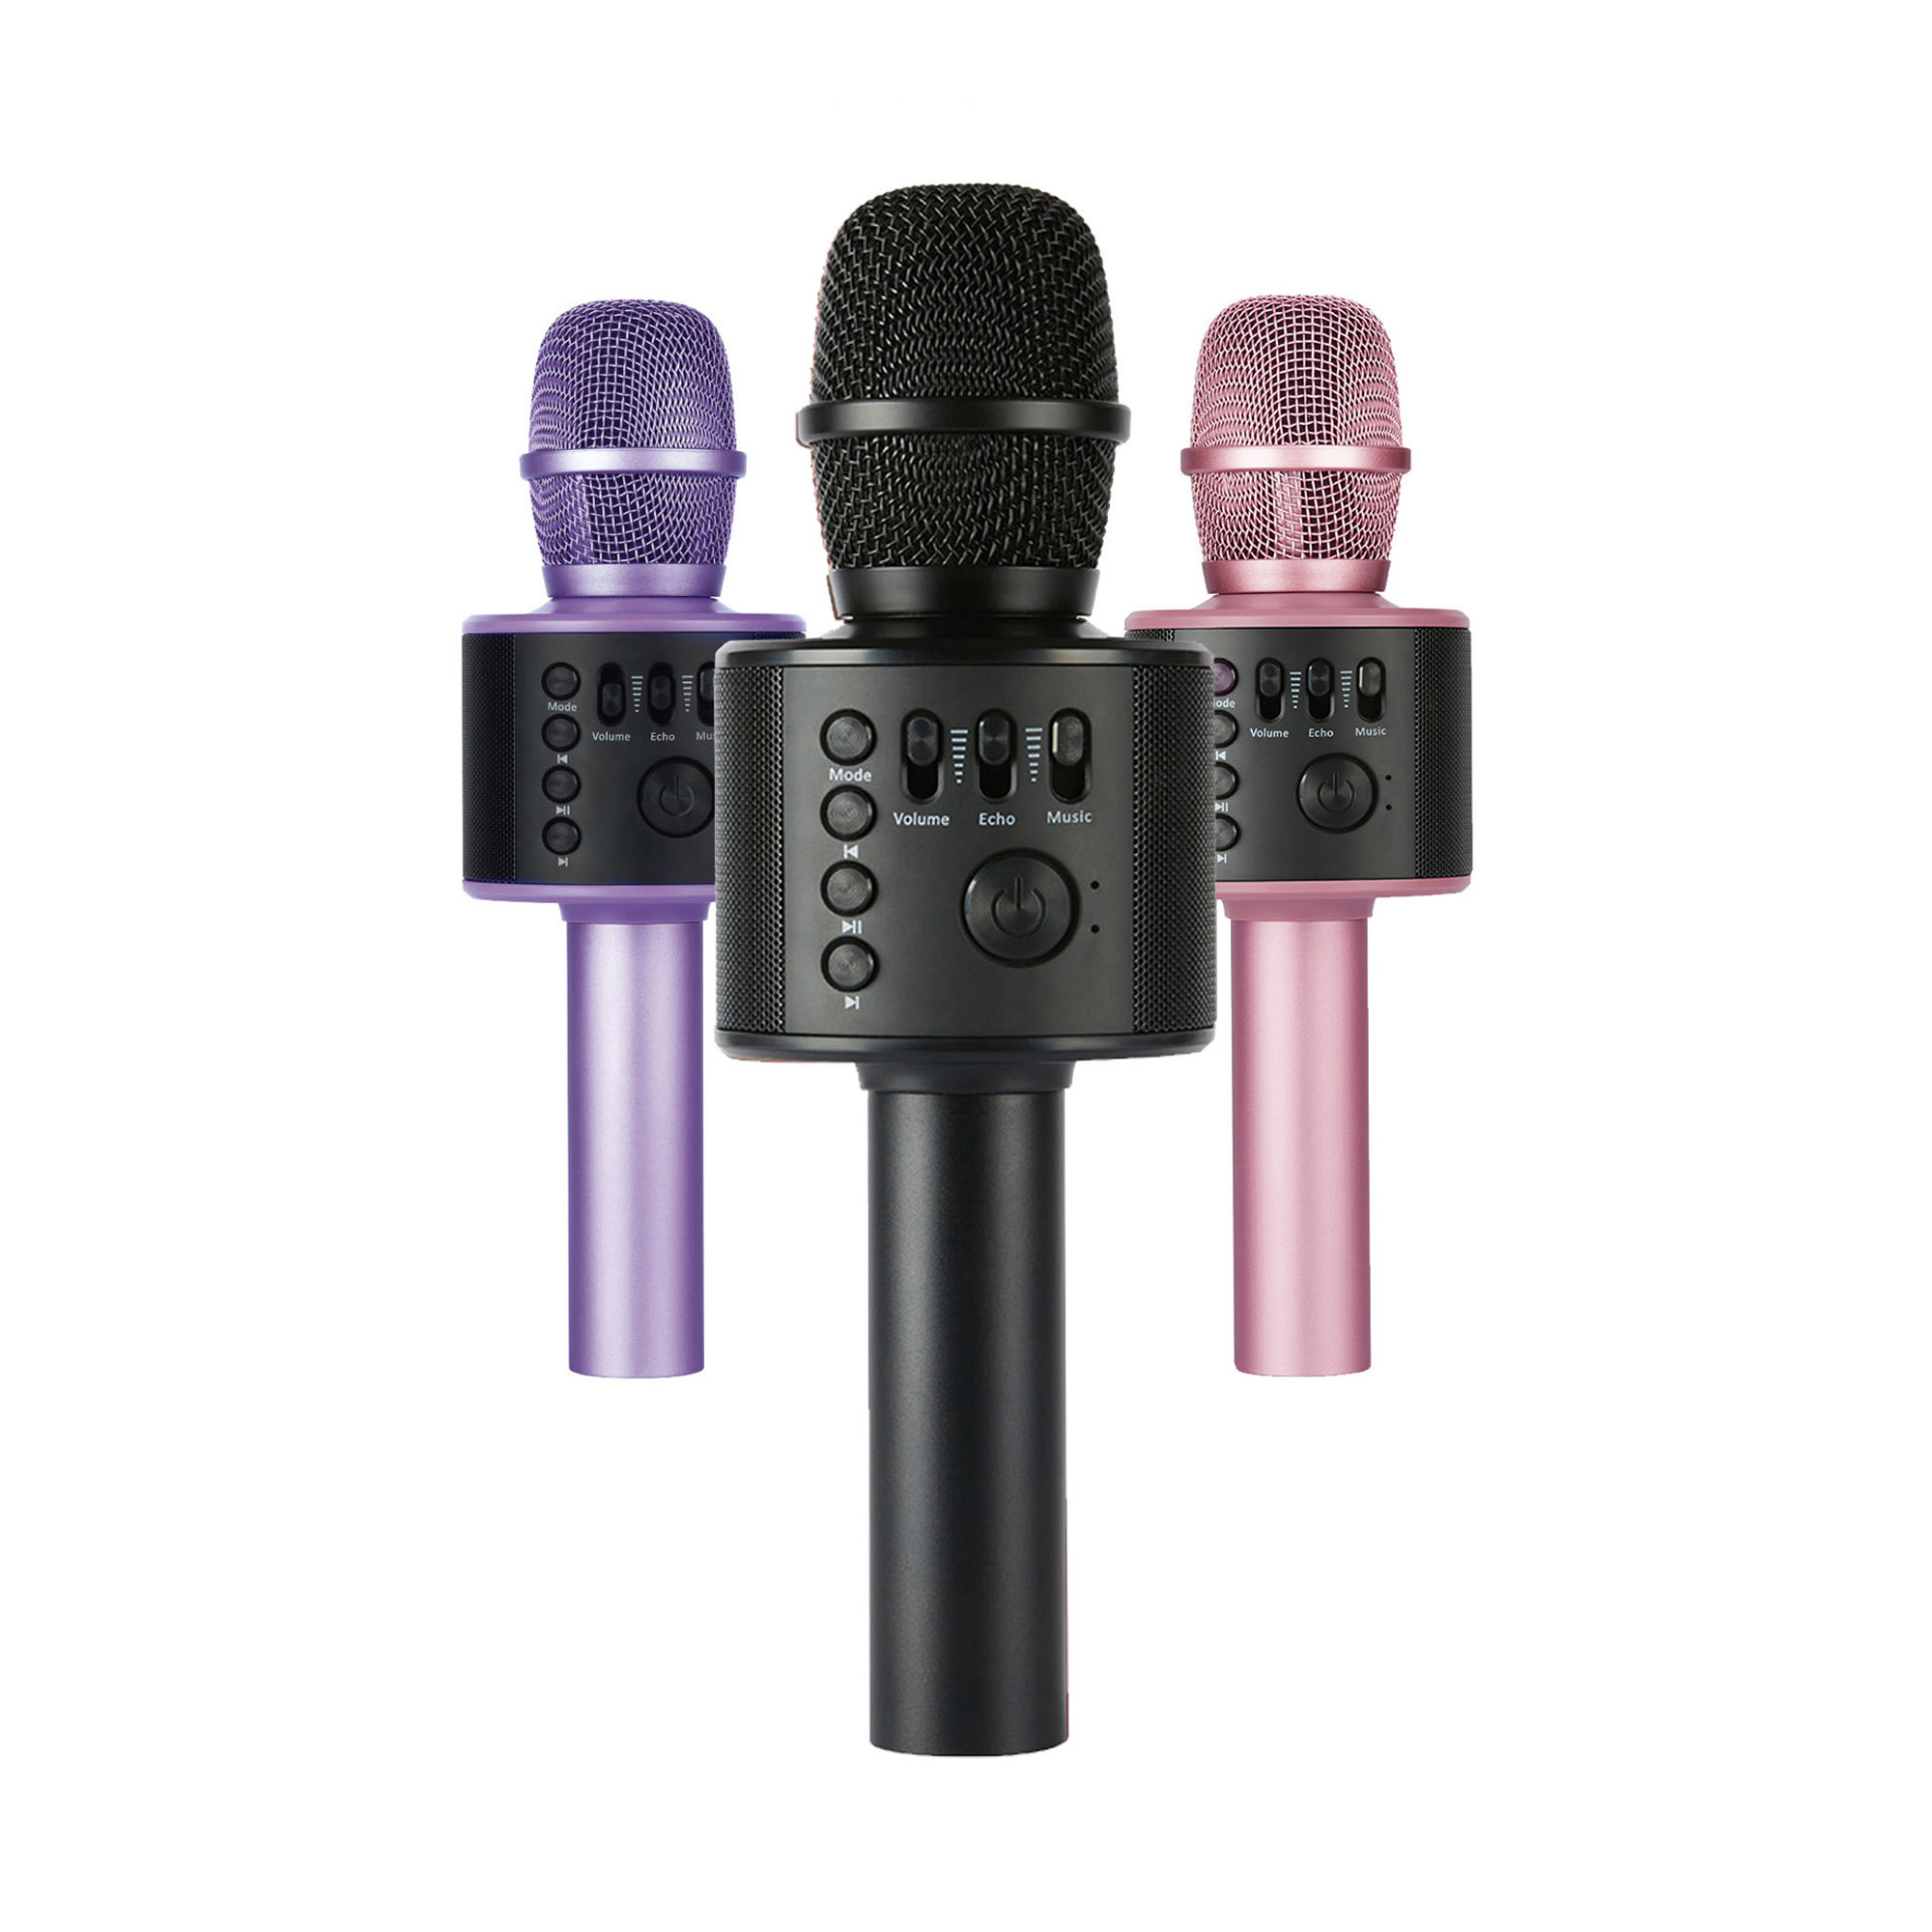 Wireless karaoke microphone • Compare best prices »